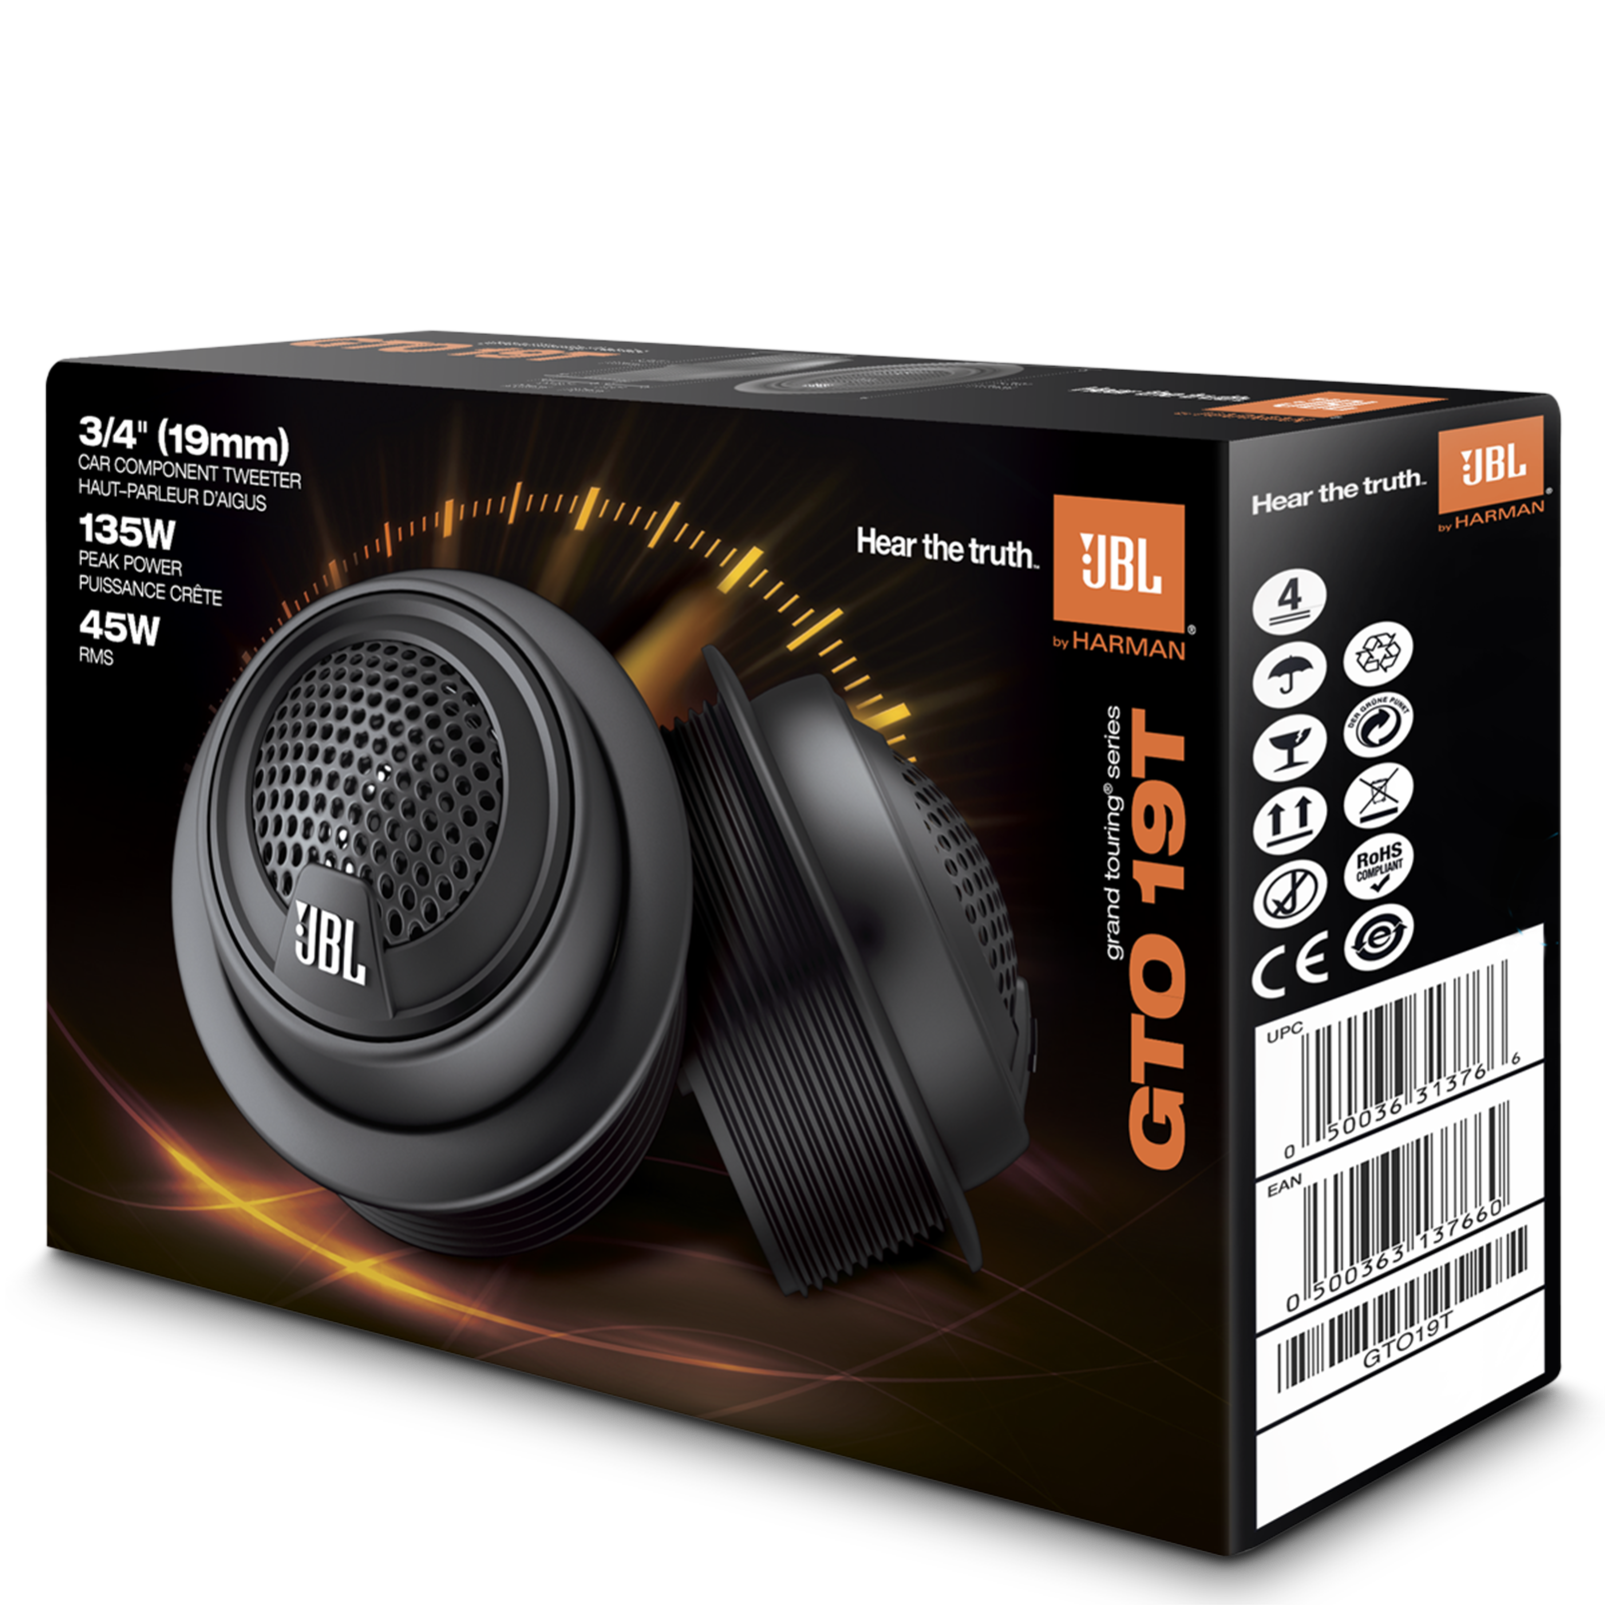 GTO19T | The JBL sound experience you 